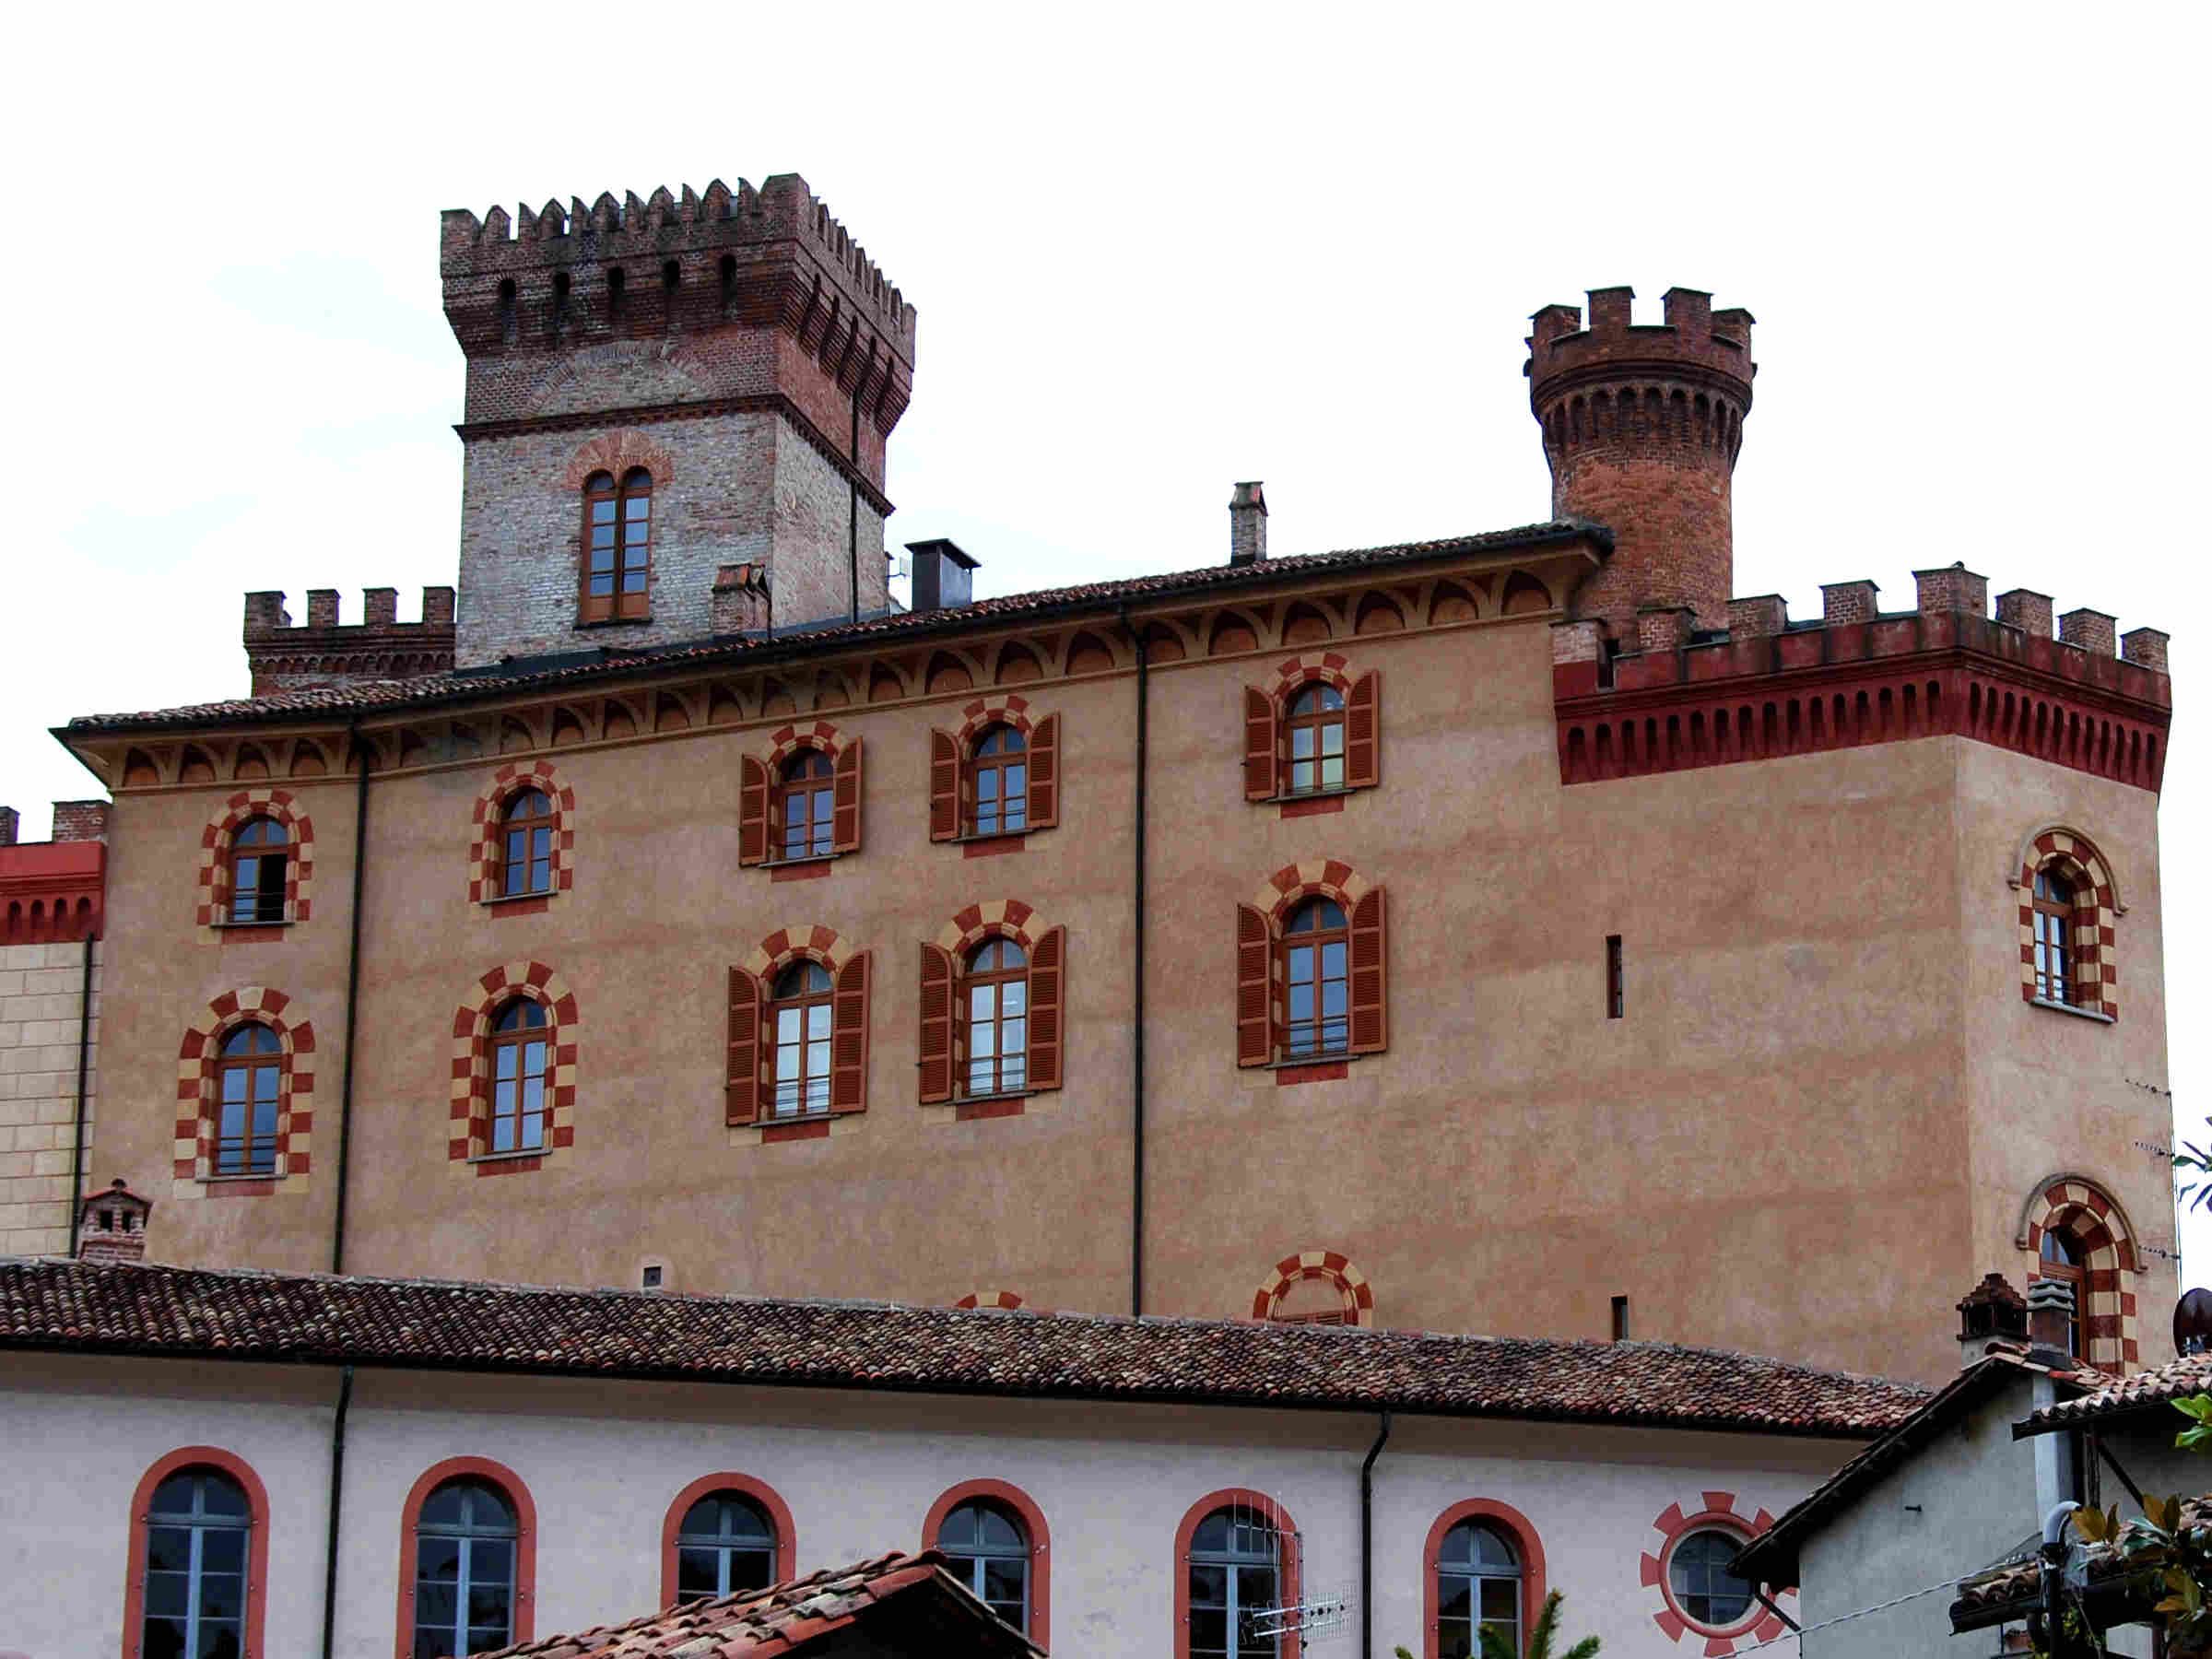 THE BAROLO PRODUCTION AREA IN LANGHE